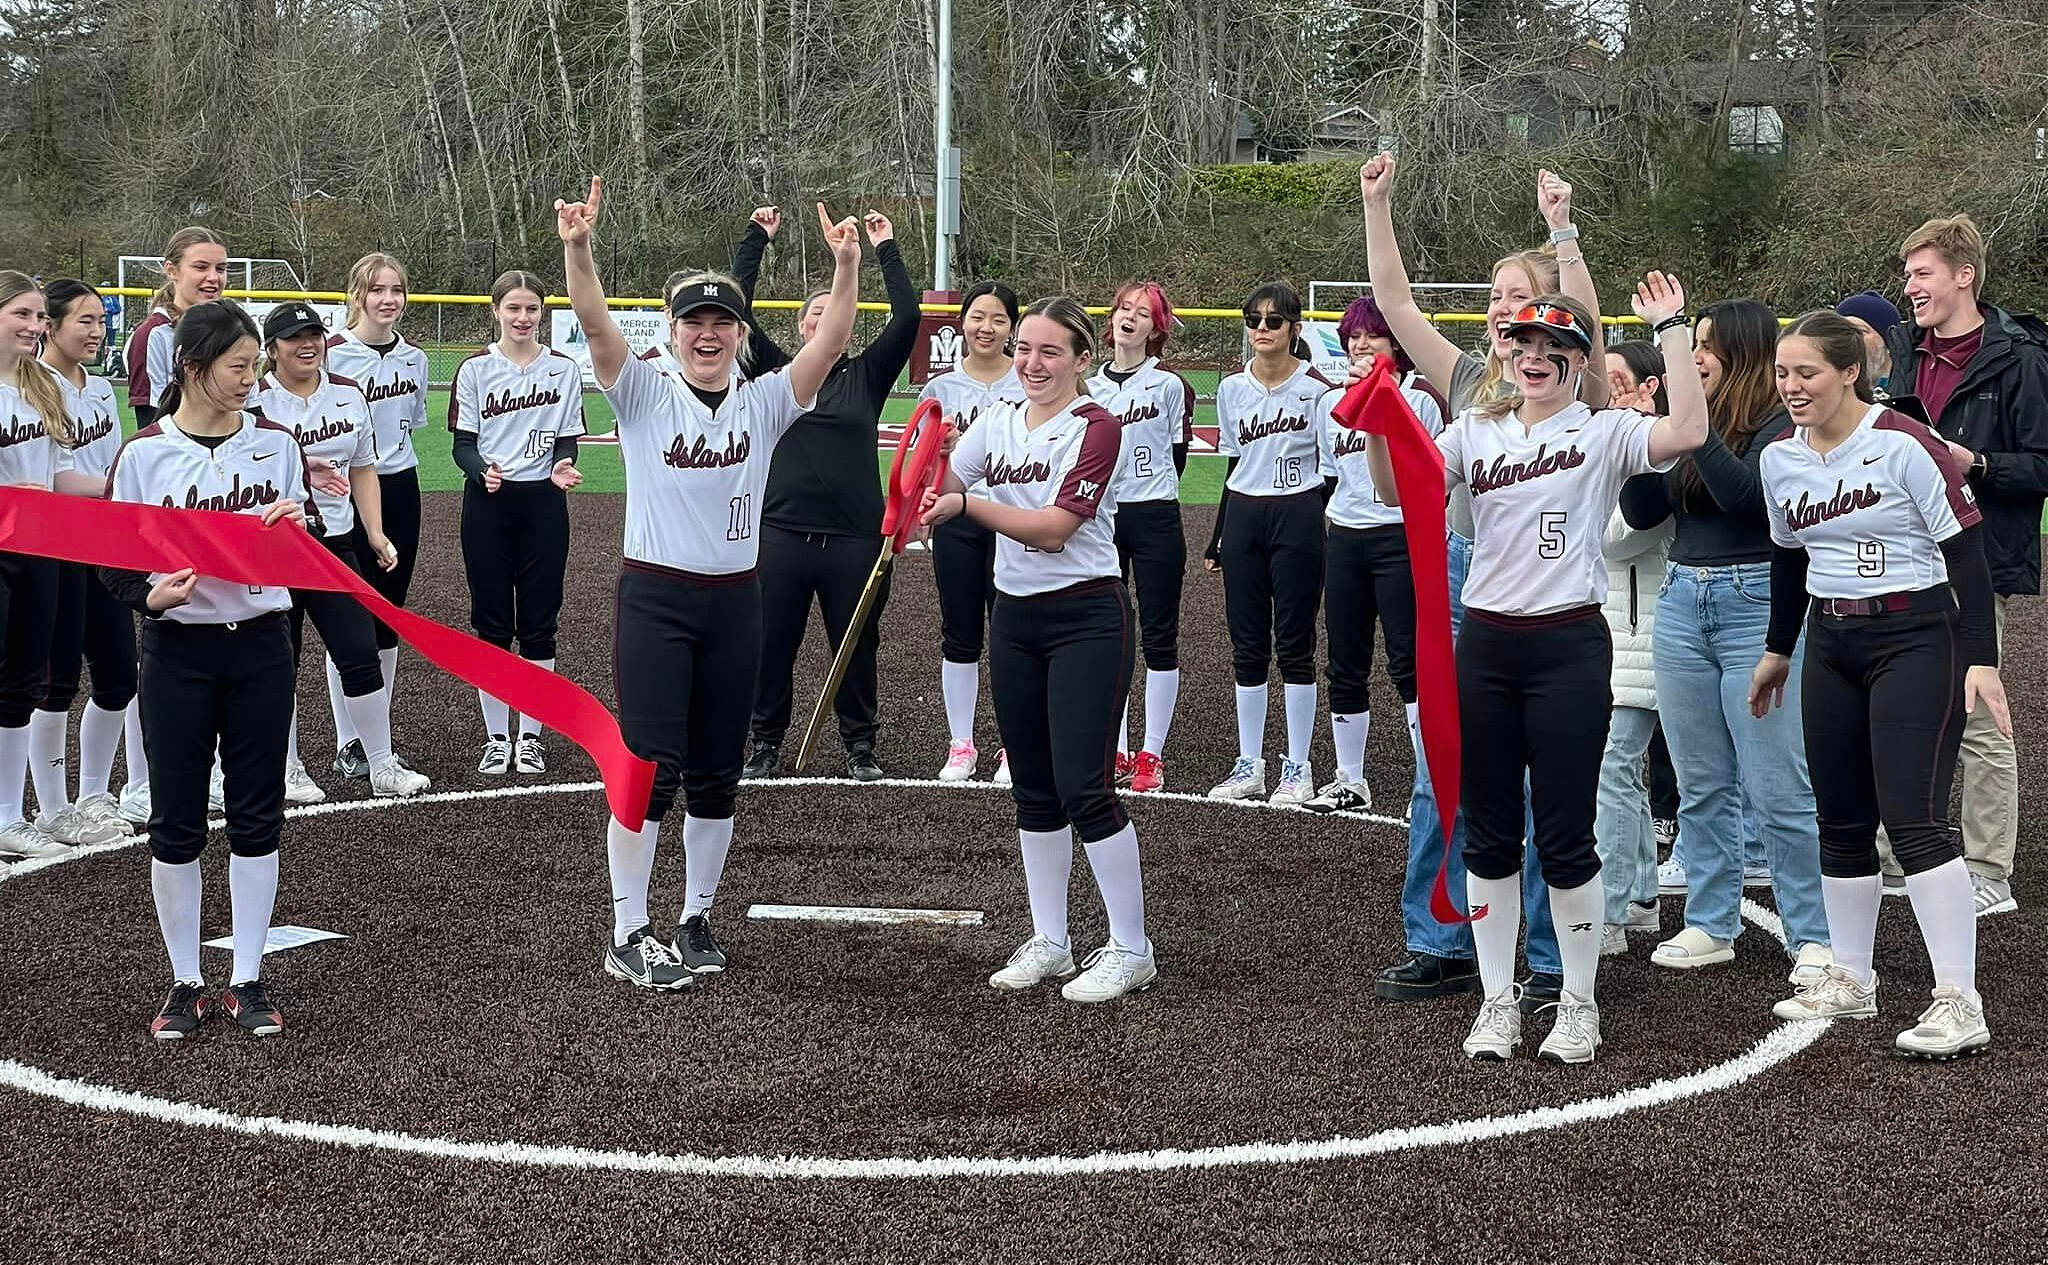 Mercer Island High School (MIHS) fastpitch softball players joyfully cut the ribbon at the recently renovated South Mercer Playfields on March 11. Mercer Island School District and the city of Mercer Island held the event and district student board representatives Andrew Howison and Asha Woerner hosted the ceremony, which took place during a 16-team MIHS fastpitch softball jamboree. District Superintendent Fred Rundle, Mayor Salim Nice, softball captain Caley Newcomer and softball head coach Amanda Mattocks addressed the large crowd that attended the event. The three ball fields and auxiliary field were enhanced with new turf and lighting. Photo courtesy of the Mercer Island School District